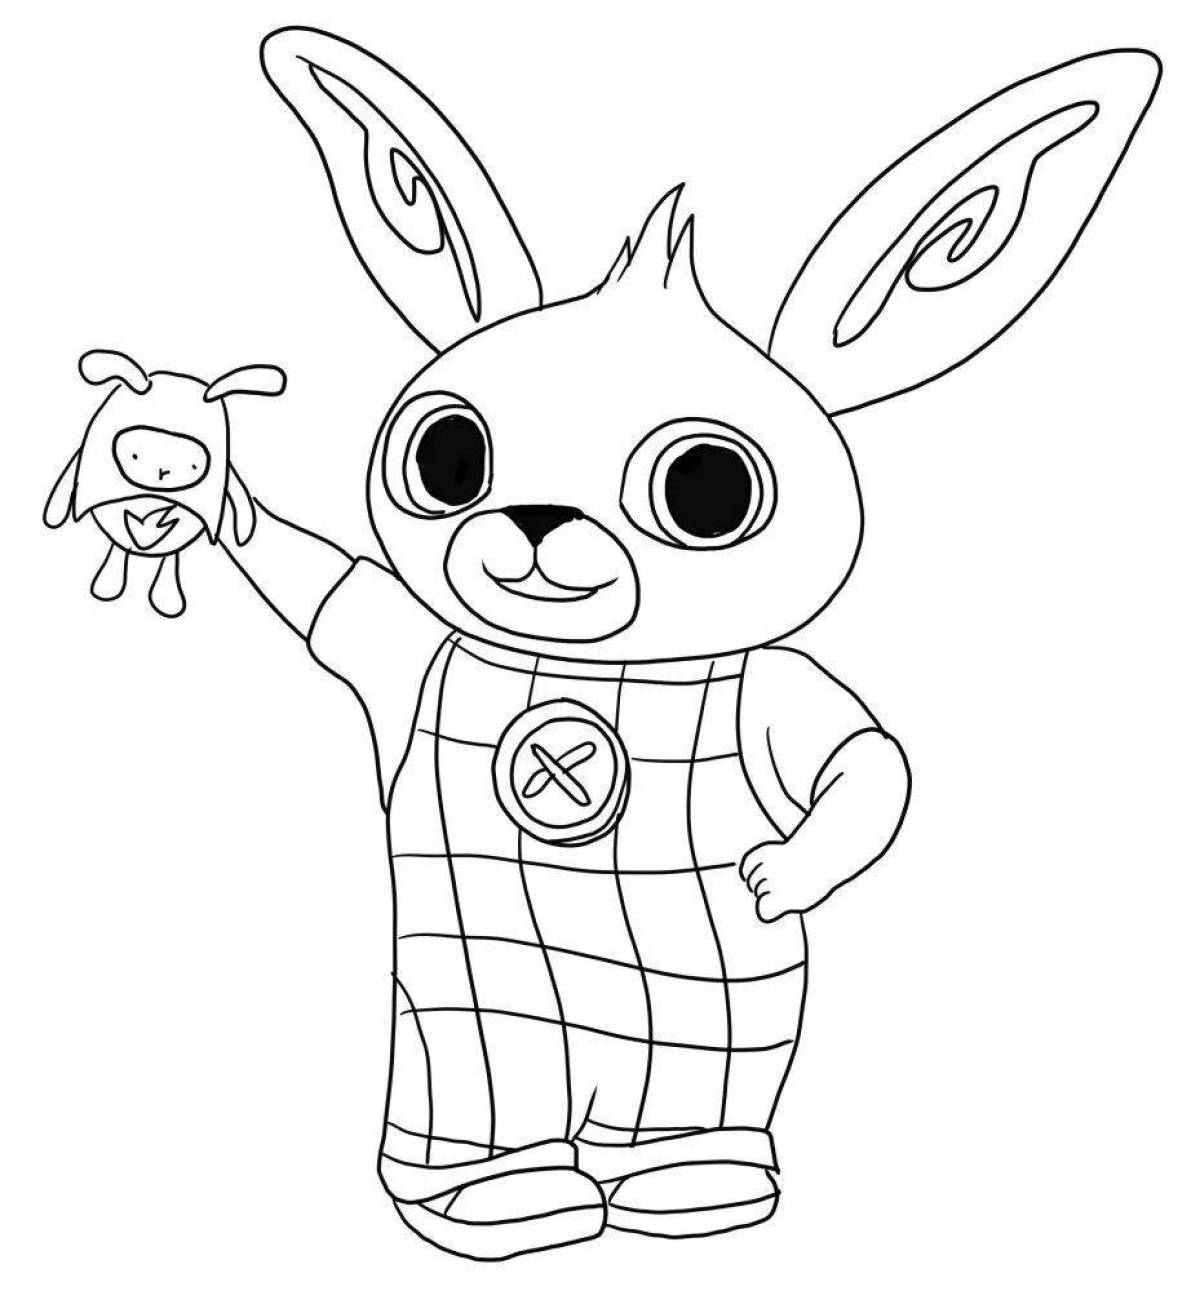 Colorful bing coloring page